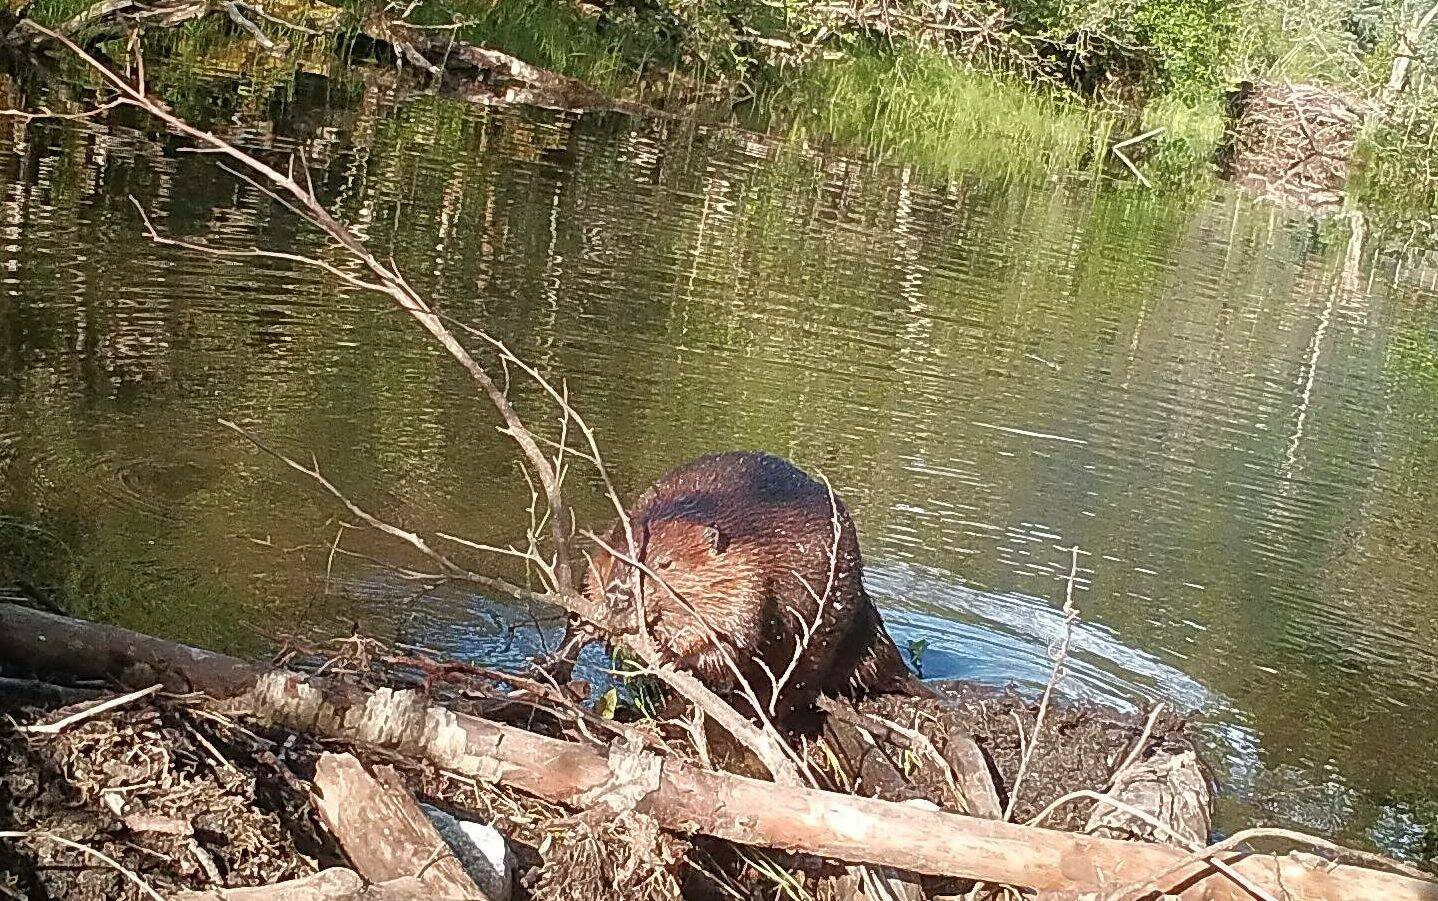 This beaver was working during the daytime, but usually beavers work at night or twilight. (Courtesy Photo / Chuck Caldwell)